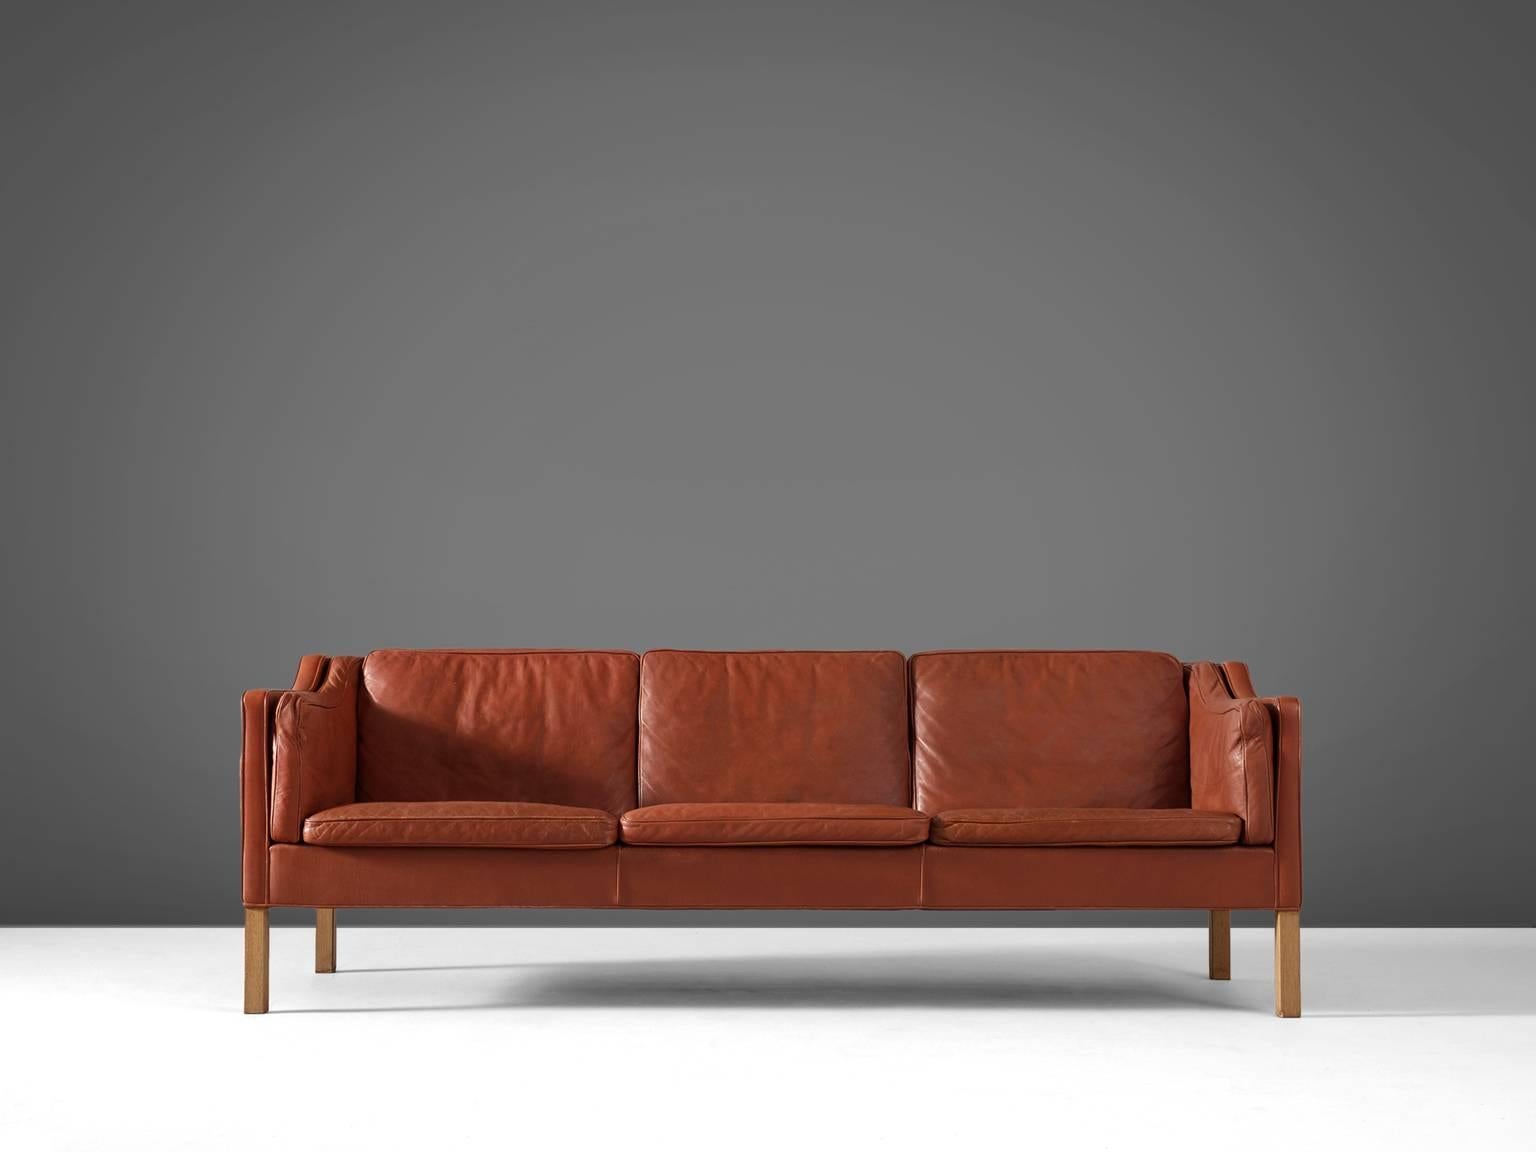 Børge Mogensen for Fredericia Stolefabrik, three-seat sofa BM2213, sienna red to cognac leather and oak, Denmark, 1962. 

Very well conditioned three-seat sofa from Børge Mogensen. This model was designed by Mogensen for his own home, in his goal